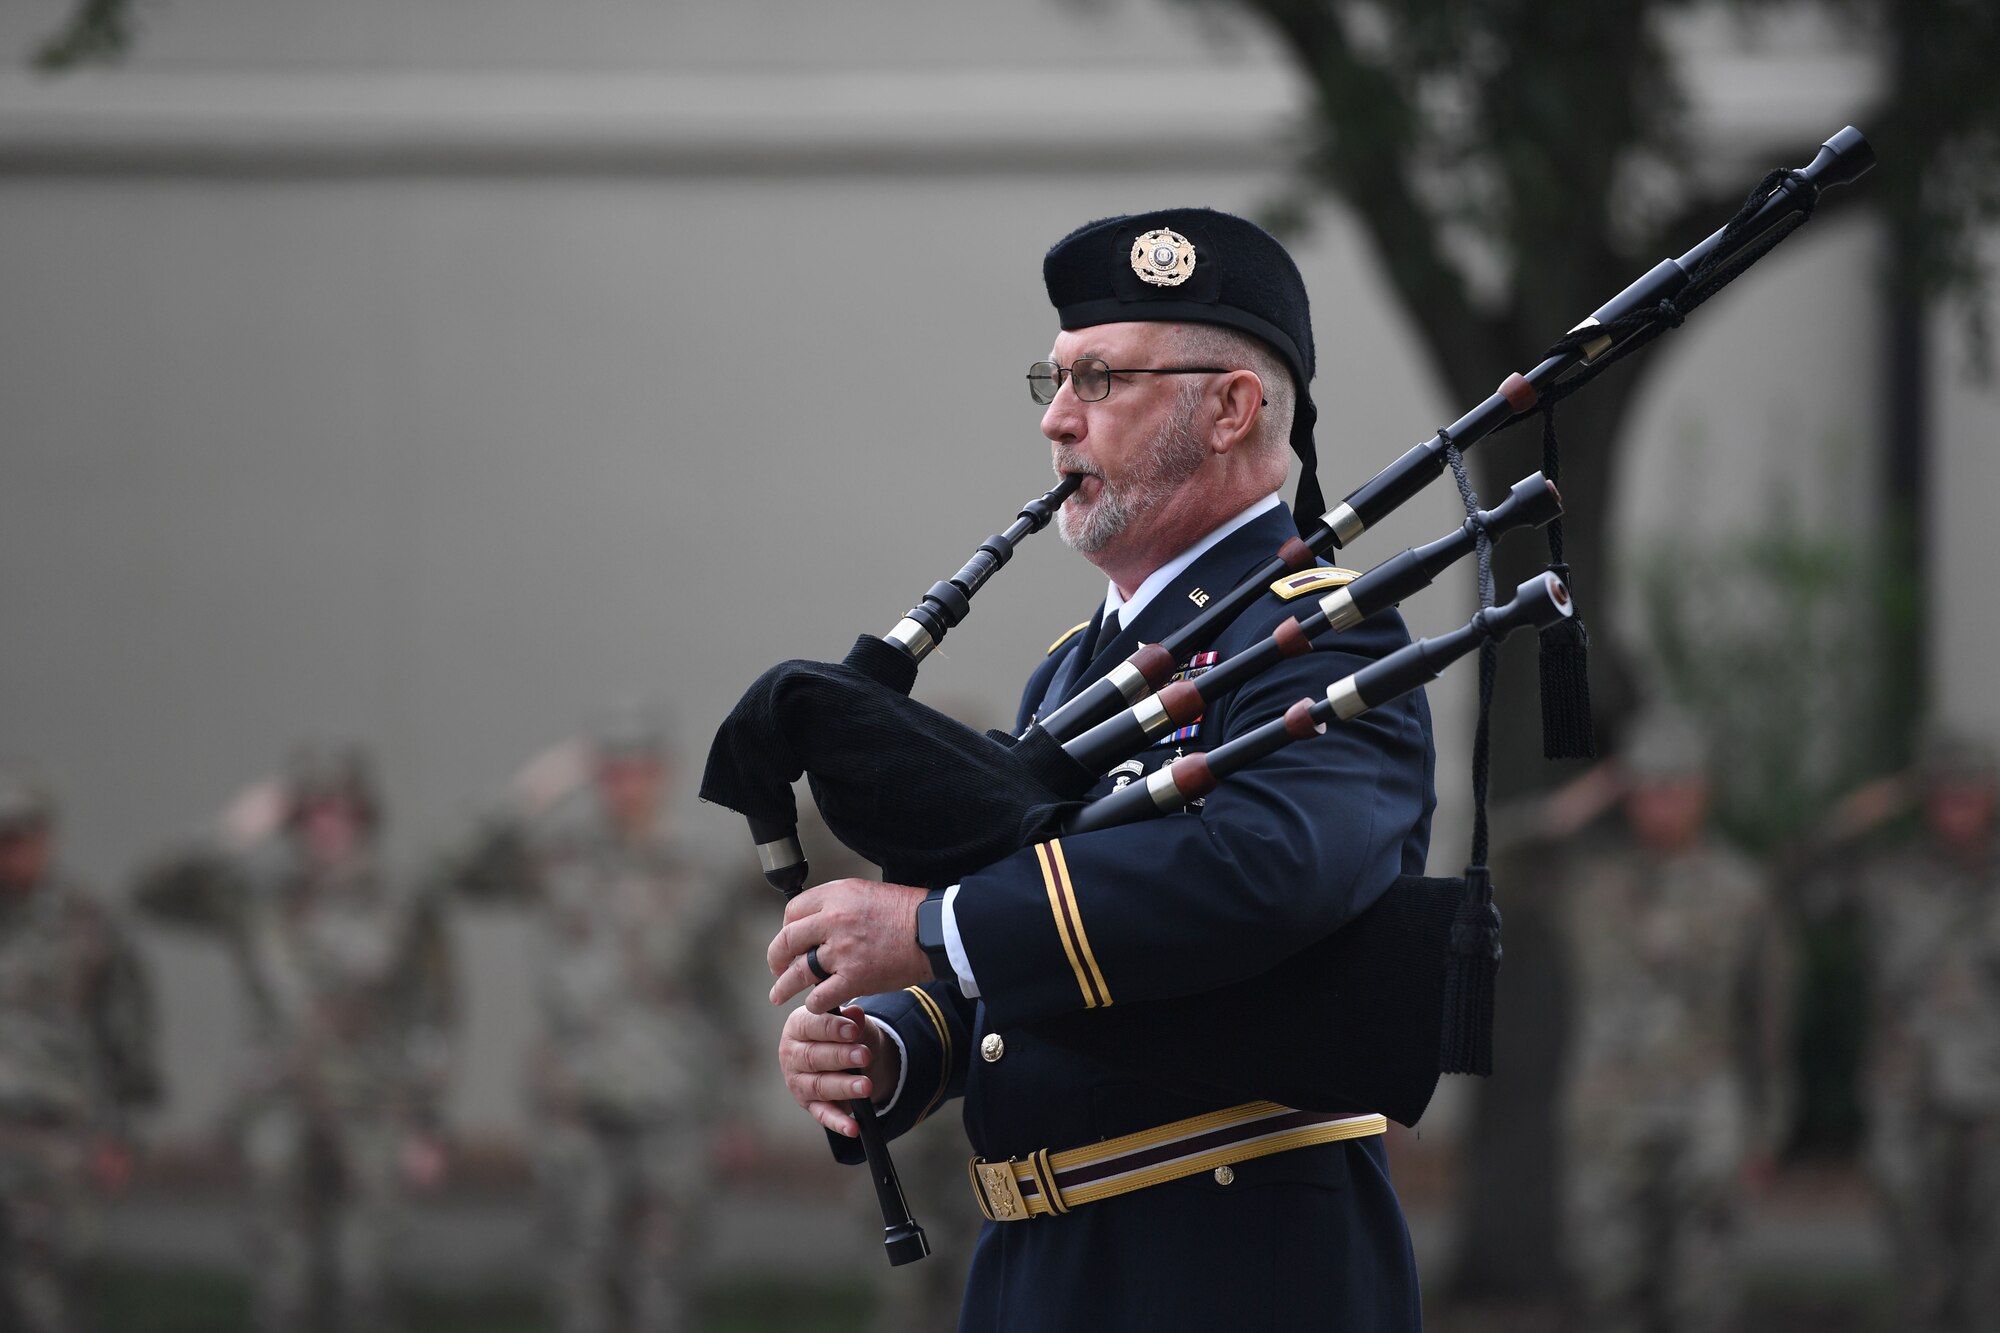 U.S. Army Retired Col. Bill Christmas plays "Amazing Grace" on his bagpipes during a 9/11 ceremony in front of the 81st Training Wing headquarters building at Keesler Air Force Base, Mississippi, Sept. 9, 2022. The event honored those who lost their lives during the 9/11 attacks. (U.S. Air Force photo by Kemberly Groue)